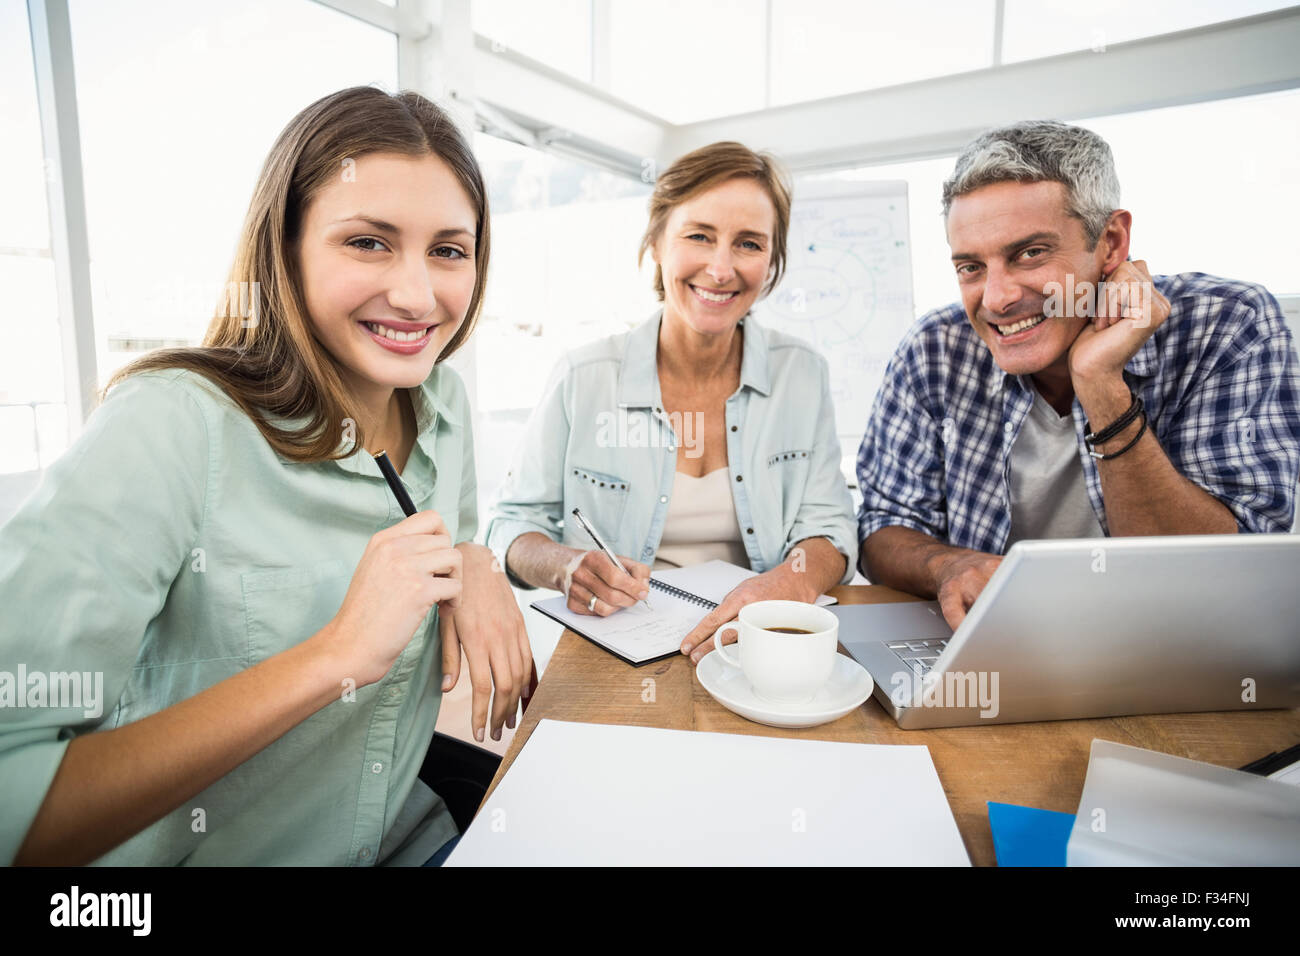 Casual business people speaking together Stock Photo